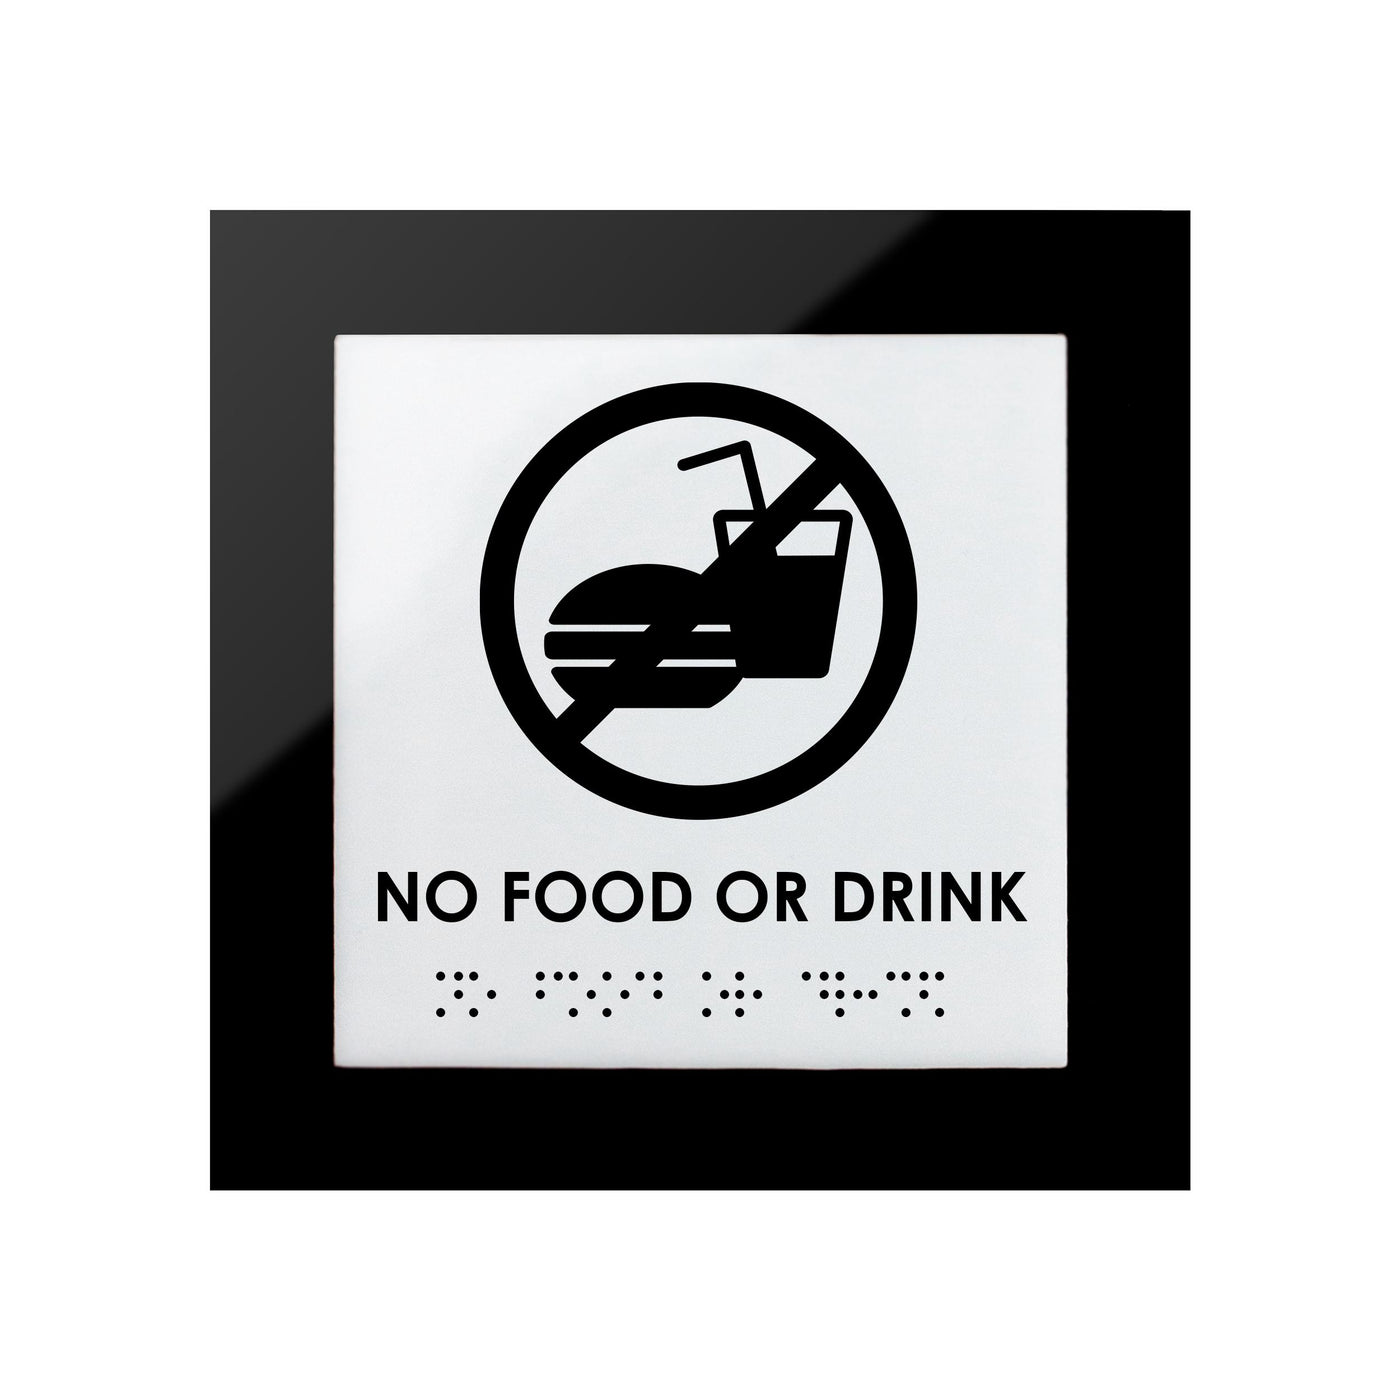 Information Signs - No Food Or Drink Acrylic Sign "Simple" Design